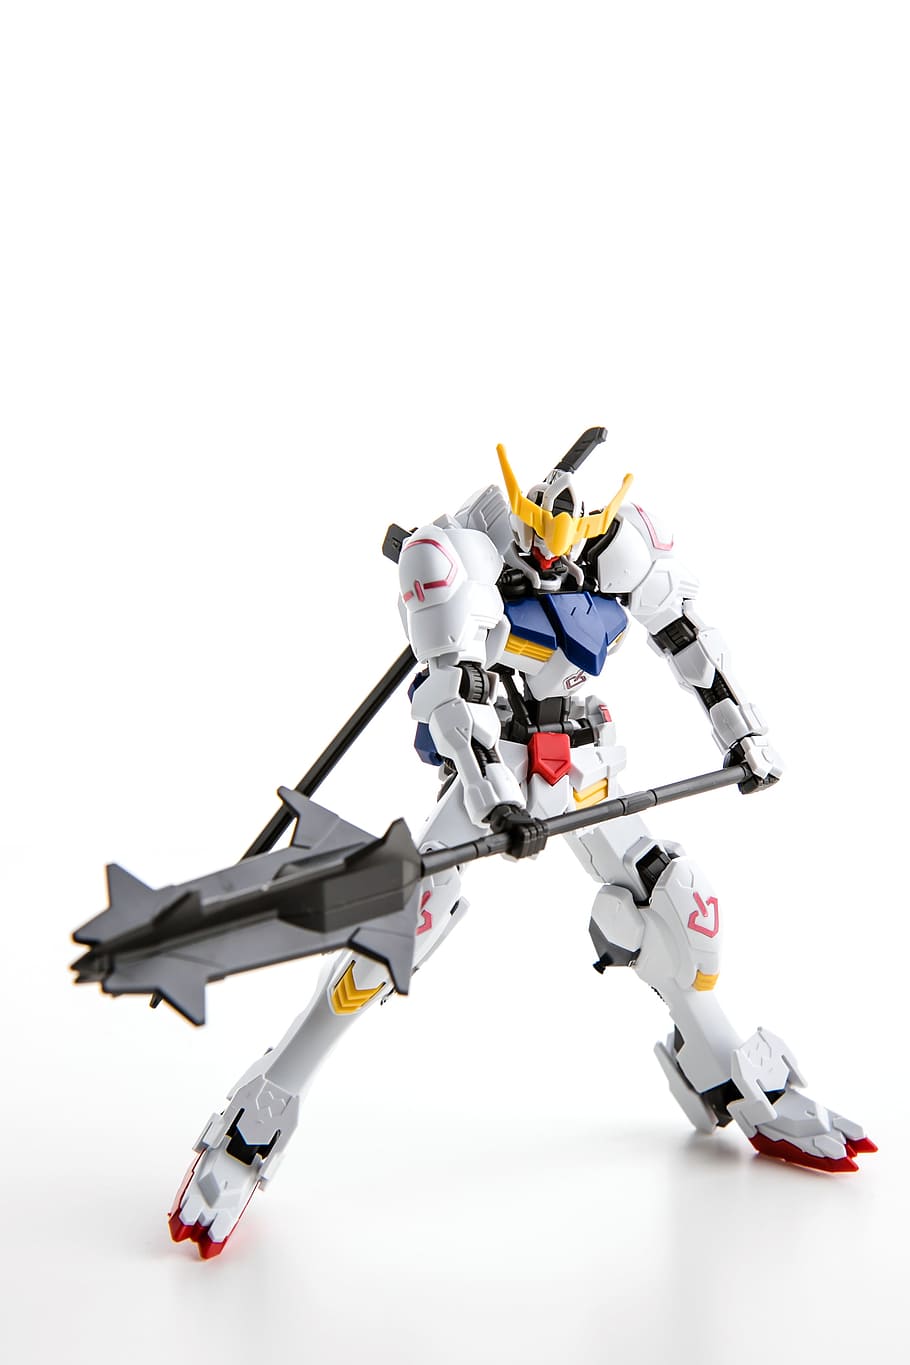 Gundam, Mobil, Toy, Products, robot, white background, human body part, people, one person, one man only